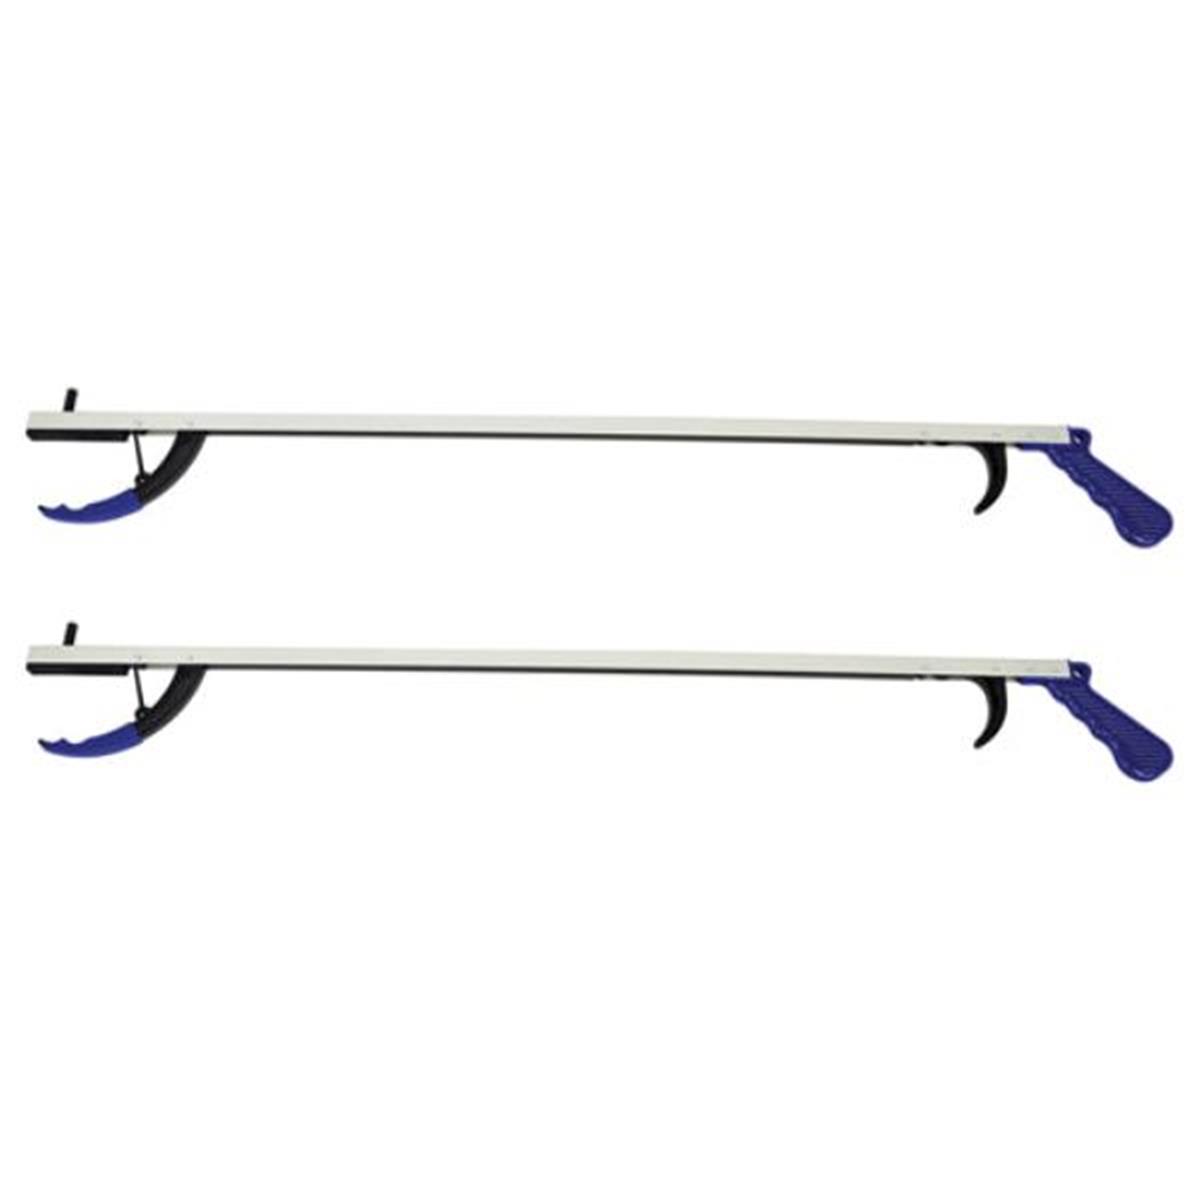 Picture of Blue Jay BJ100154 32 in. Nothing Beyond Your Reach Lightweight Reachers - Pack of 2